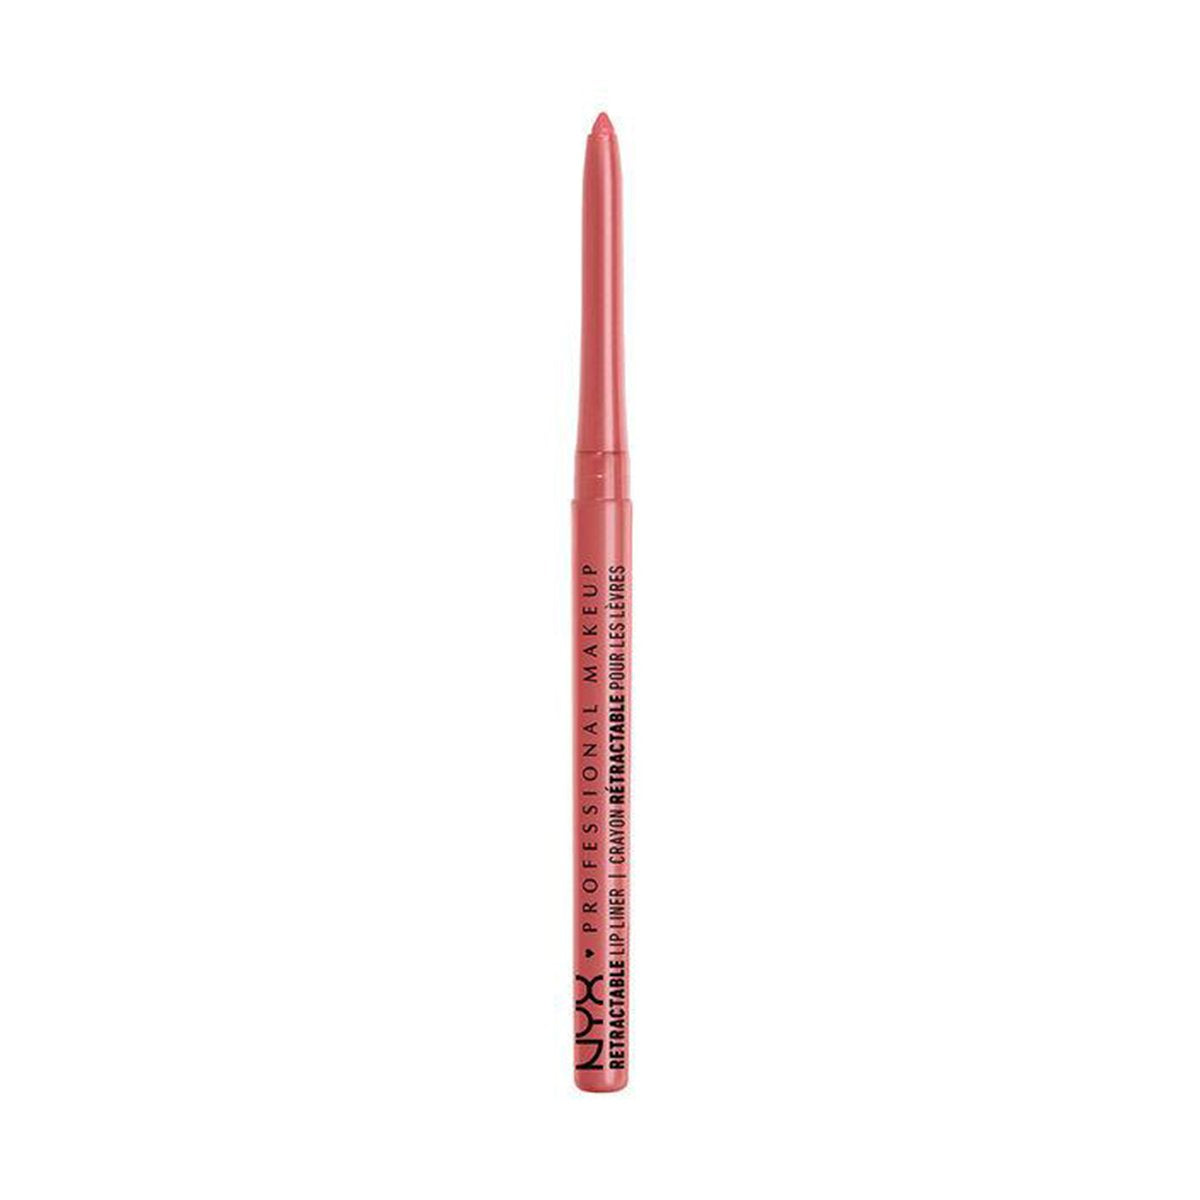 MECHANICAL PENCIL LIP PRETTY IN PINK - NYX PROFESSIONAL MAKEUP